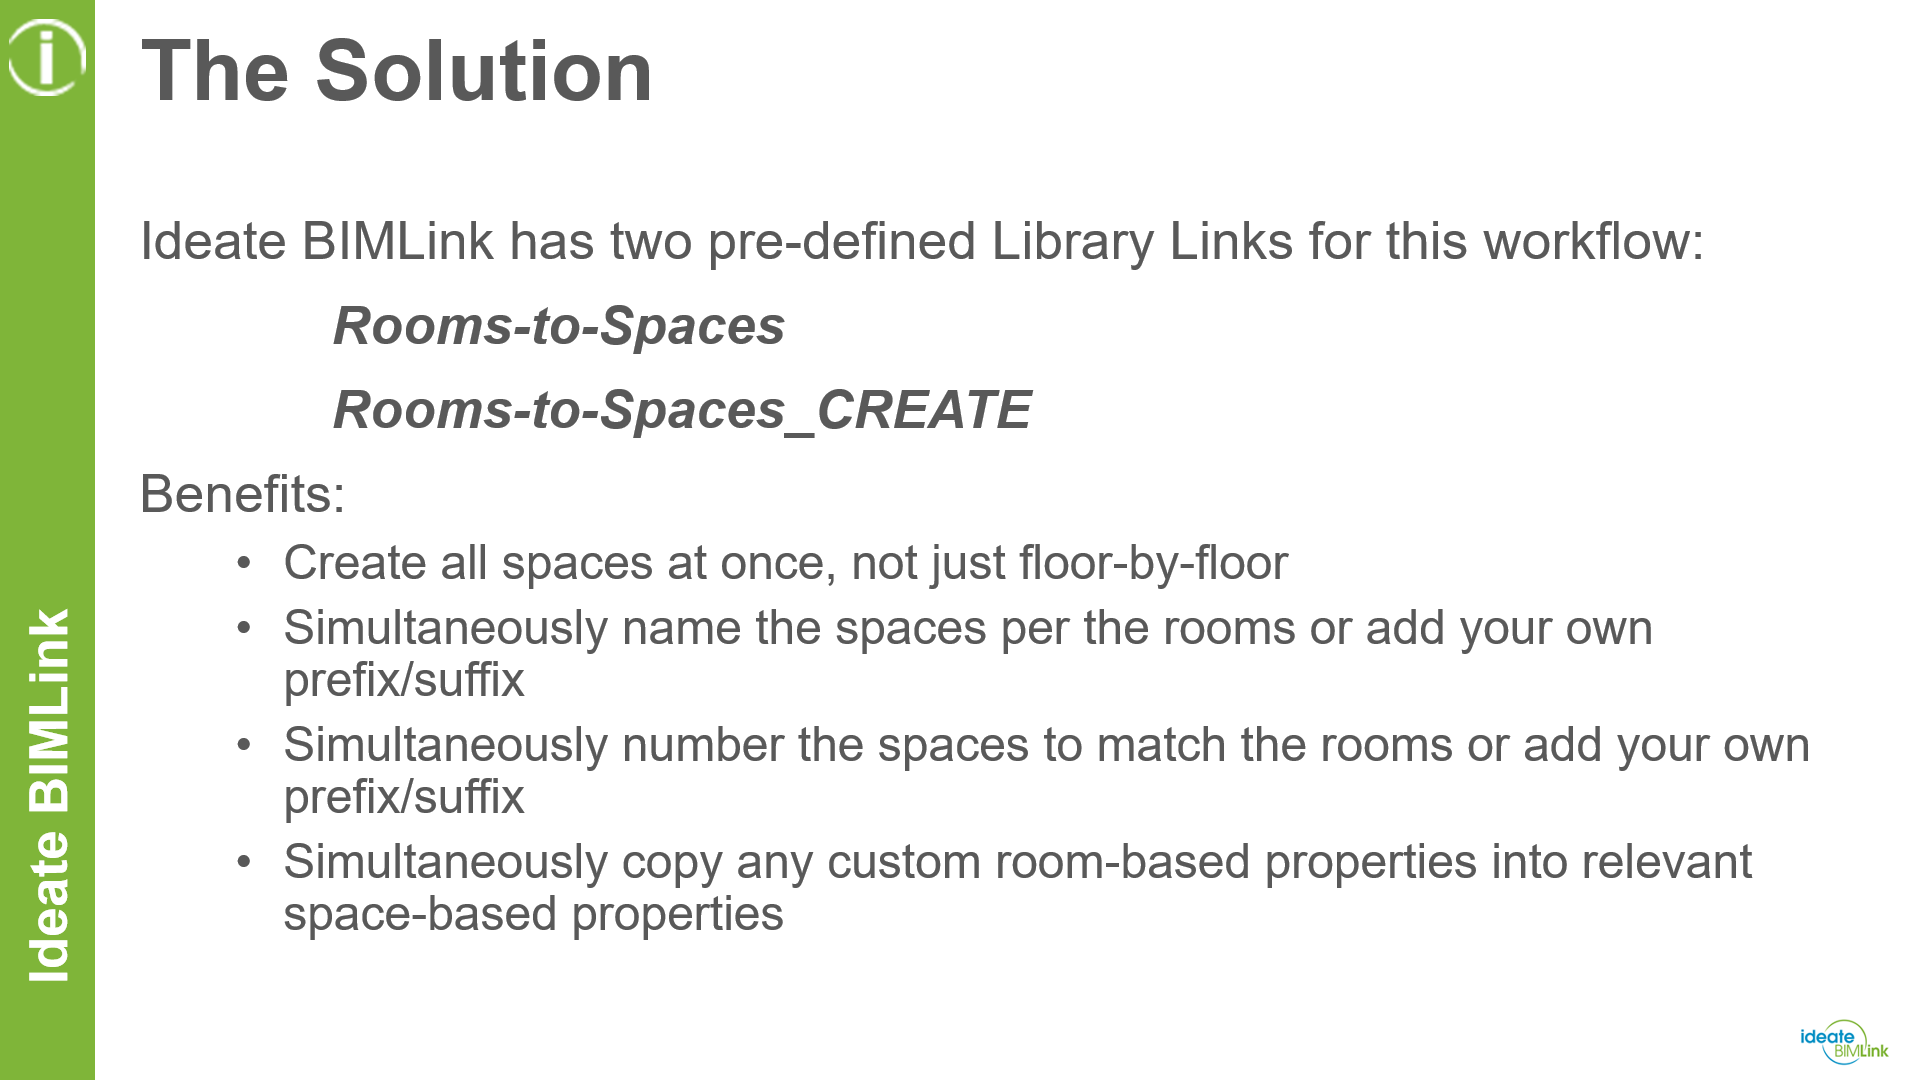 Ideate BIMLink's pre-defined Library Links for this workflow and their benefits